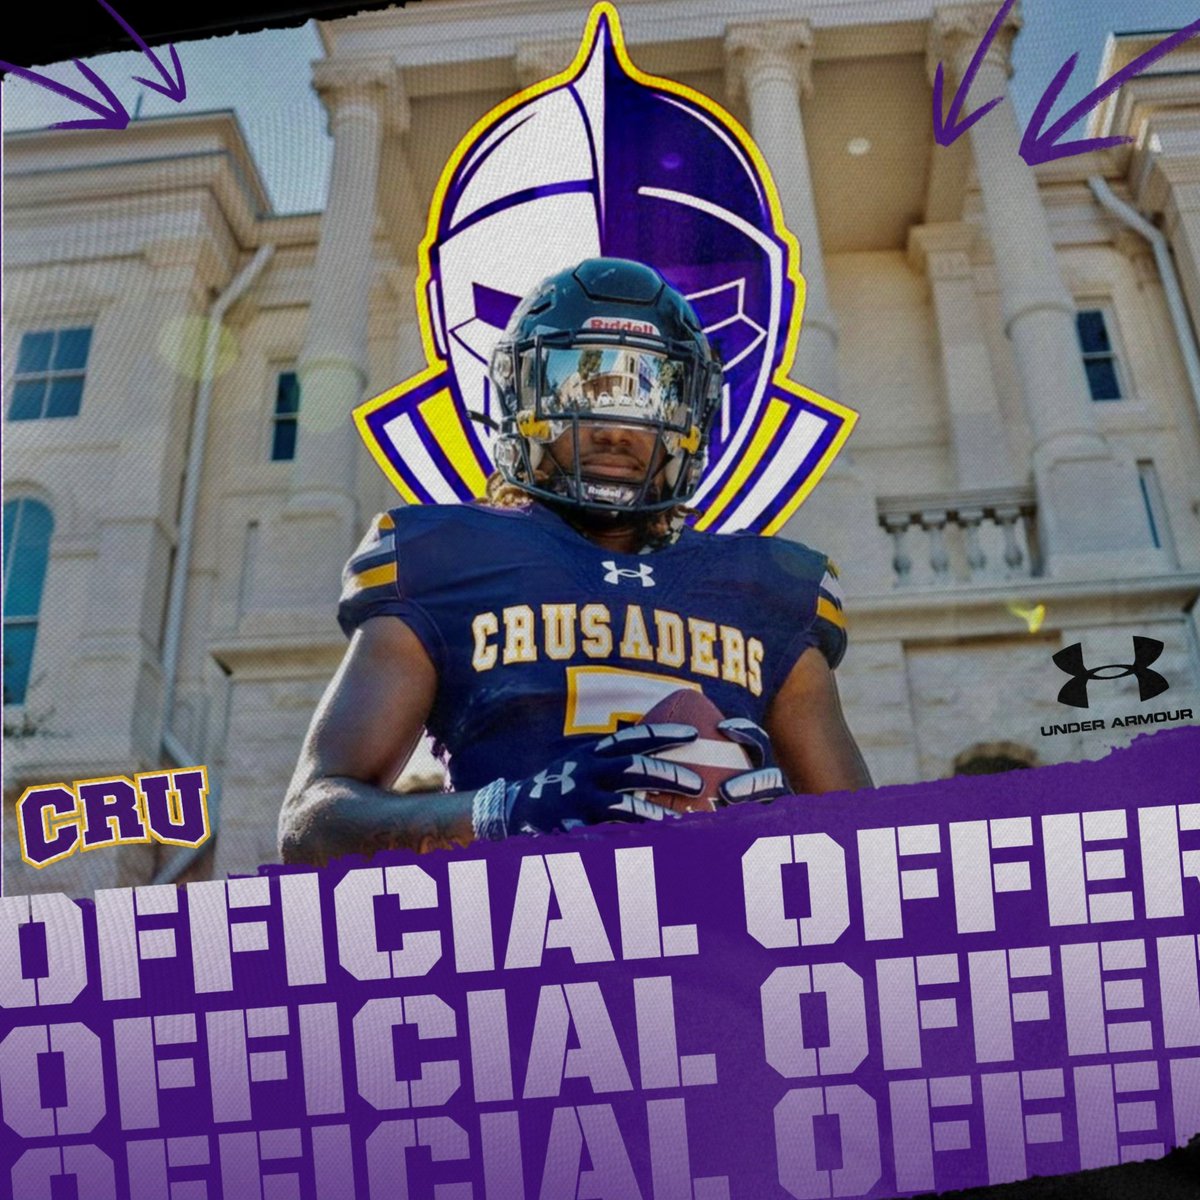 #AGTG After a great conversation with @Coach_Brace I am blessed to say I have received my first offer from the University Mary Hardin-Baylor. @Coach_Bragg @DezBlackCoach @coach_u87 #gocru